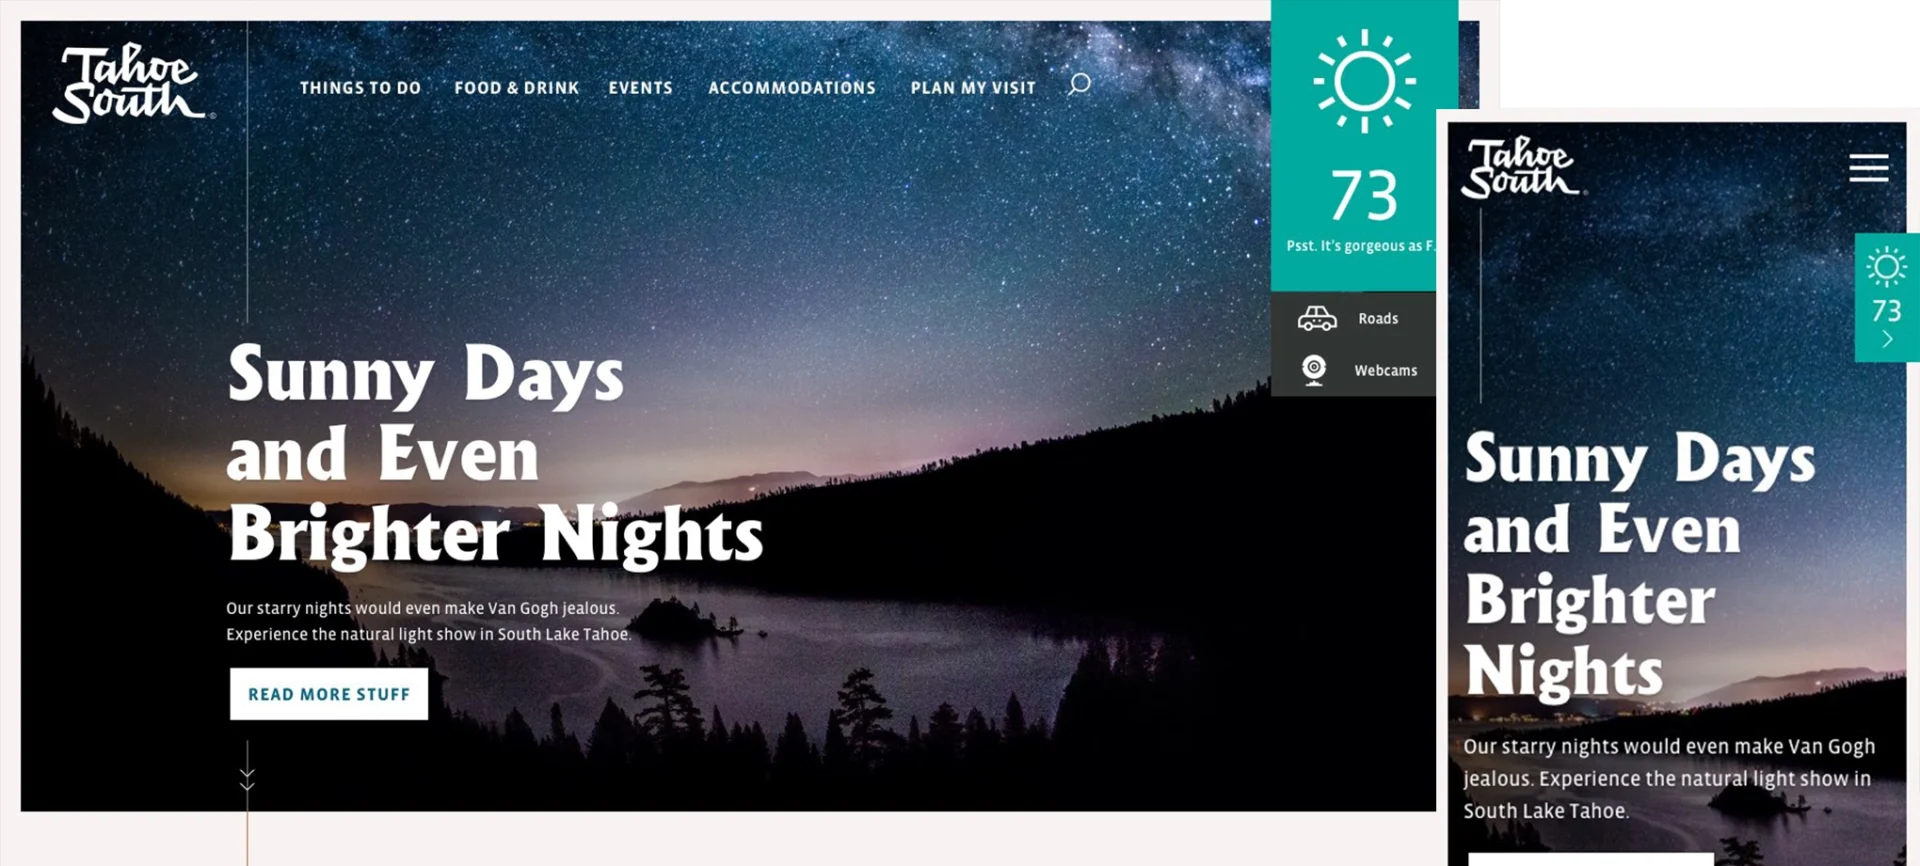 Elevating the Online Experience for Lake Tahoe Visitors